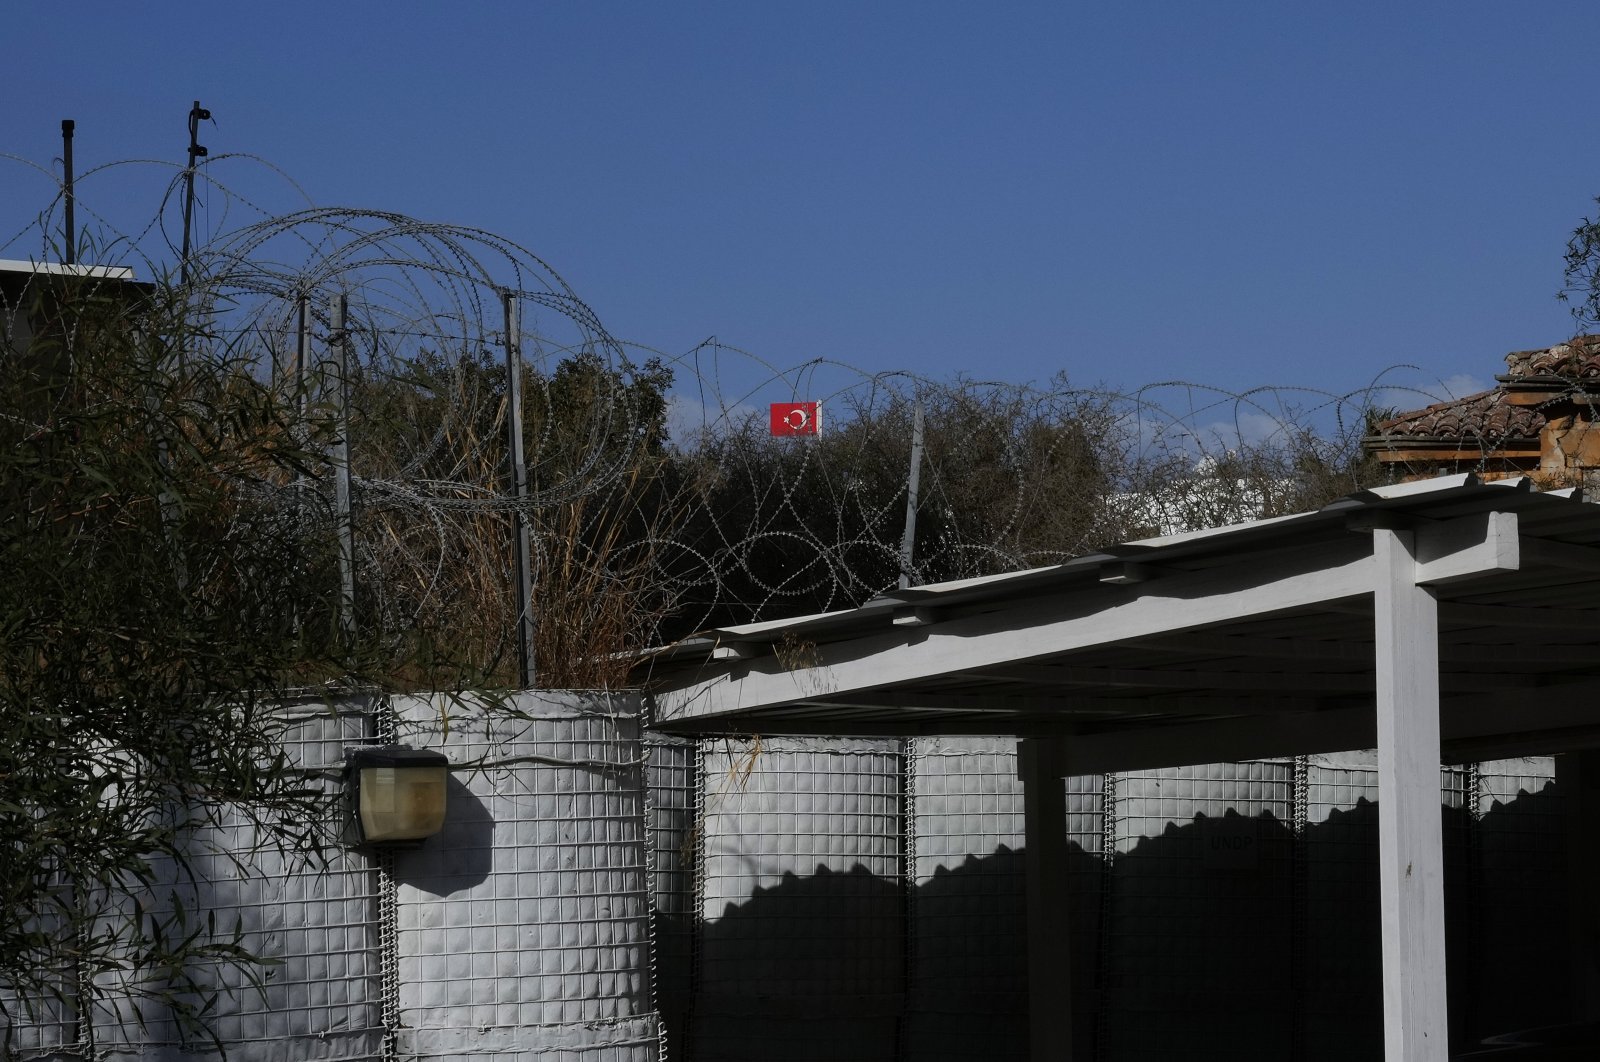 A Turkish flag waves in the Turkish-controlled area in the U.N buffer zone between Turkish Cyprus and the Greek Cypriot administration in the divided capital Nicosia, Cyprus island, Dec. 1, 2021. (AP Photo)